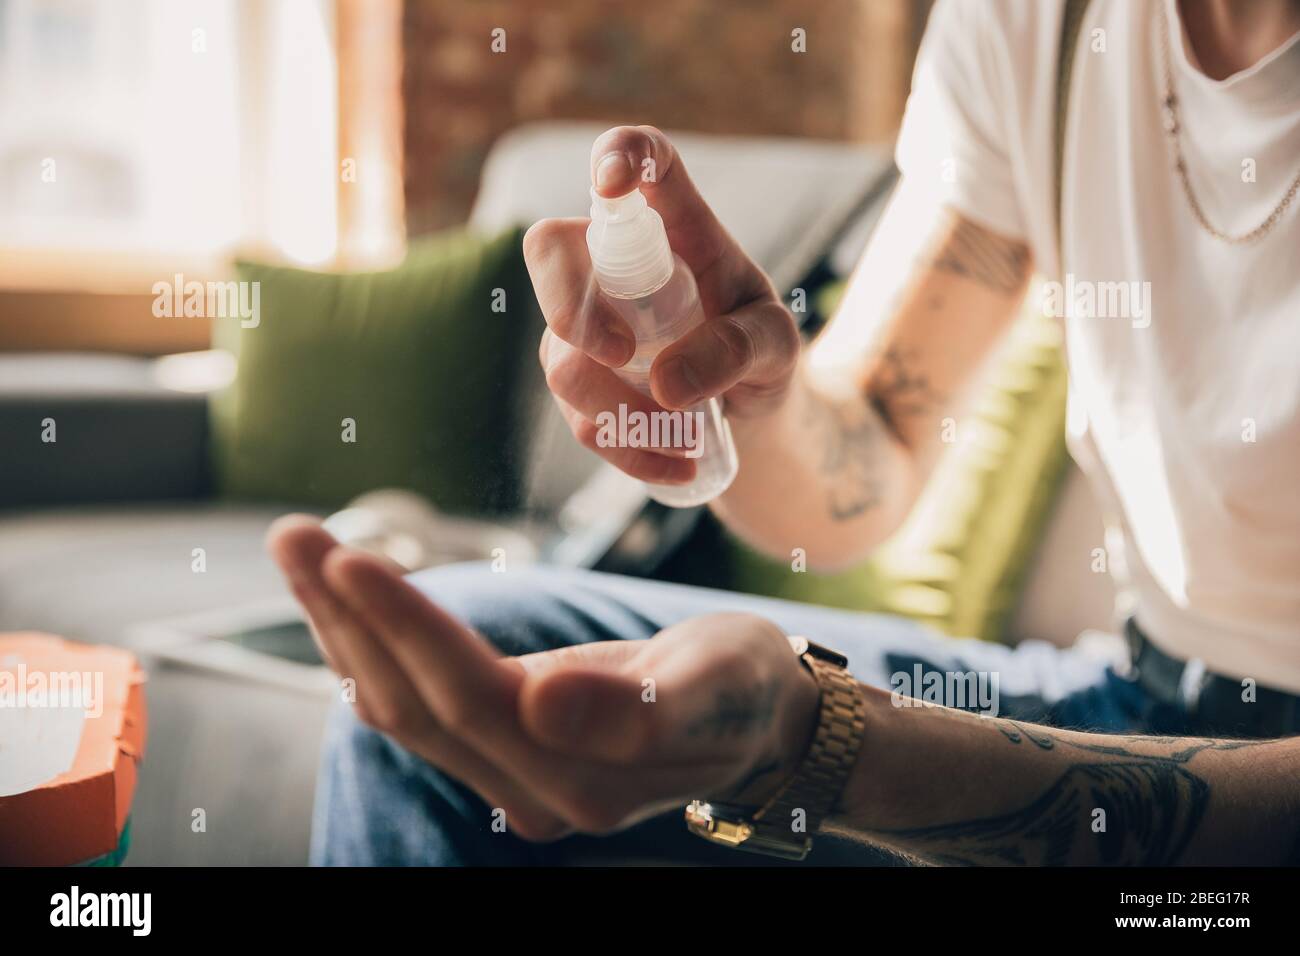 Disinfecting. Man studying at home during online courses, smart school. Getting classes or profession while isolated, quarantine against coronavirus spreading. Using laptop, smartphone, headphones. Stock Photo